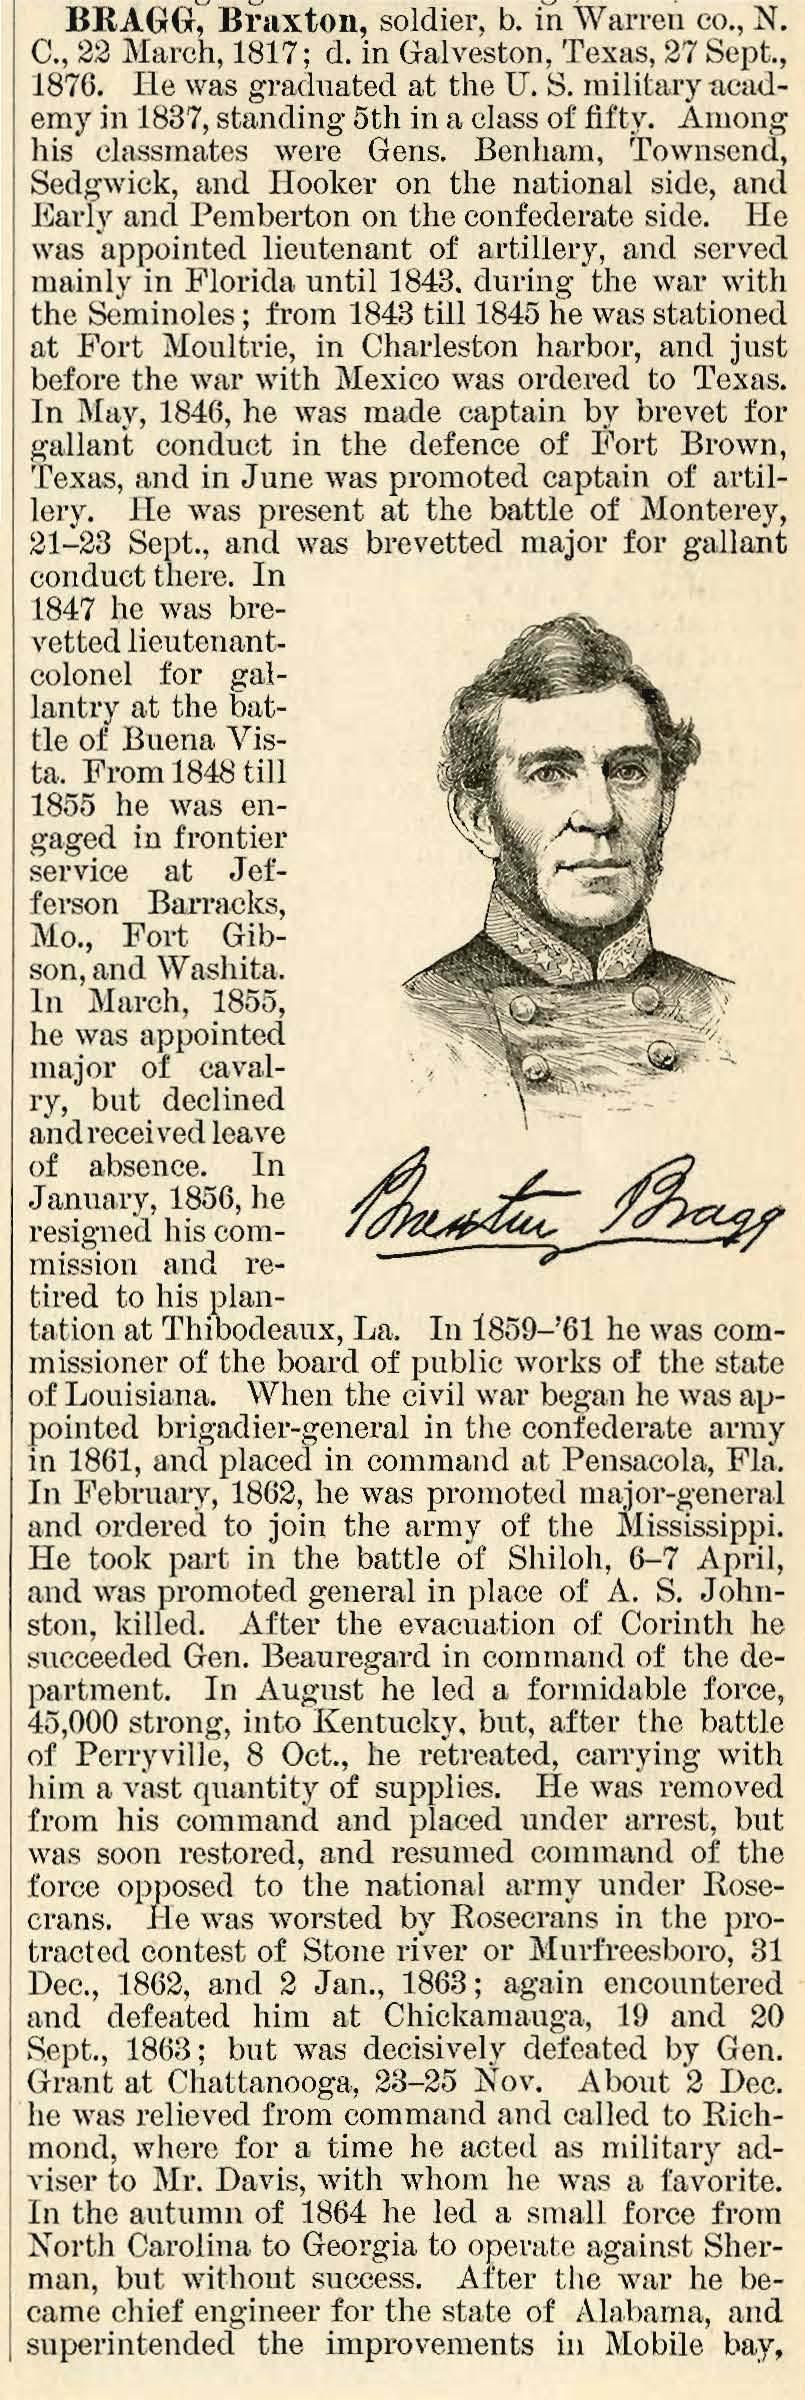 BRAGG; Braxton, soldier, b. in Warren co., N. C., 22.Ma.l'ch, 1817; d. in Galveston, Texas, 27 Sept., 1876. He was gradnated at the U. S. military academy in 1837, standing 5th in a class of tifty.